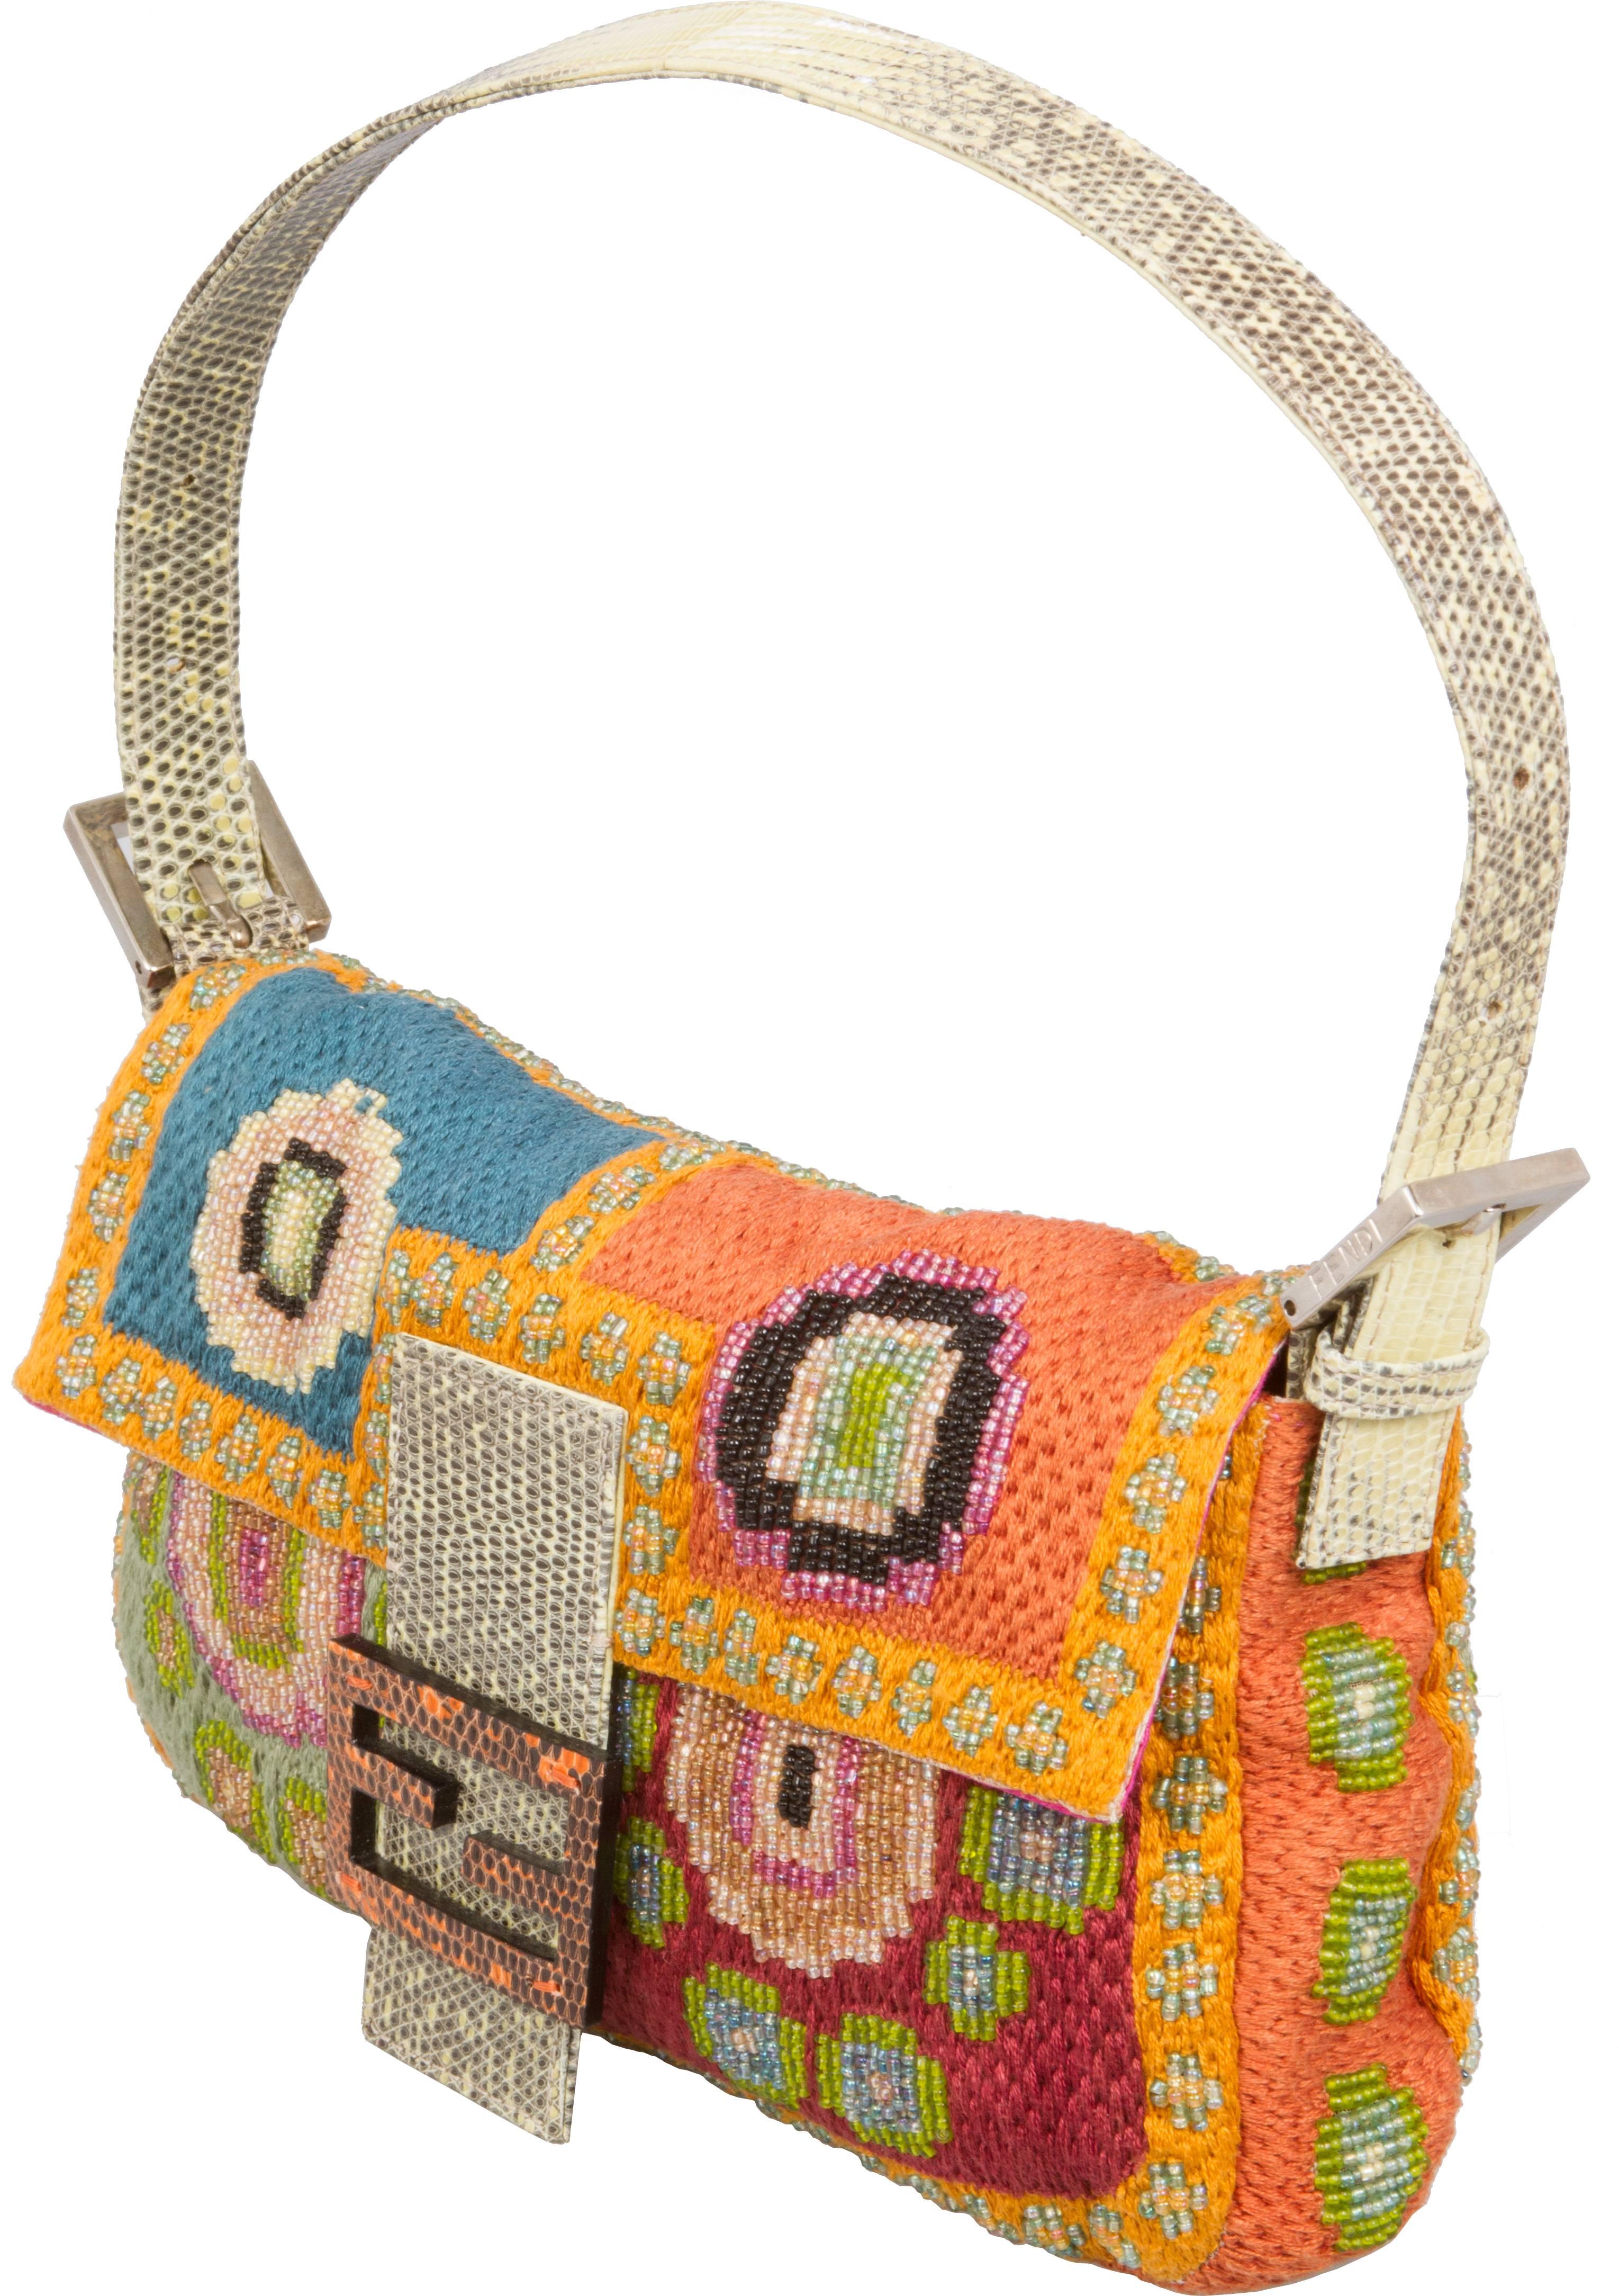 This fabulous runway bag from Fendi that has beaded flowers and a Fuscia lined interior with a lizard strap and closure.